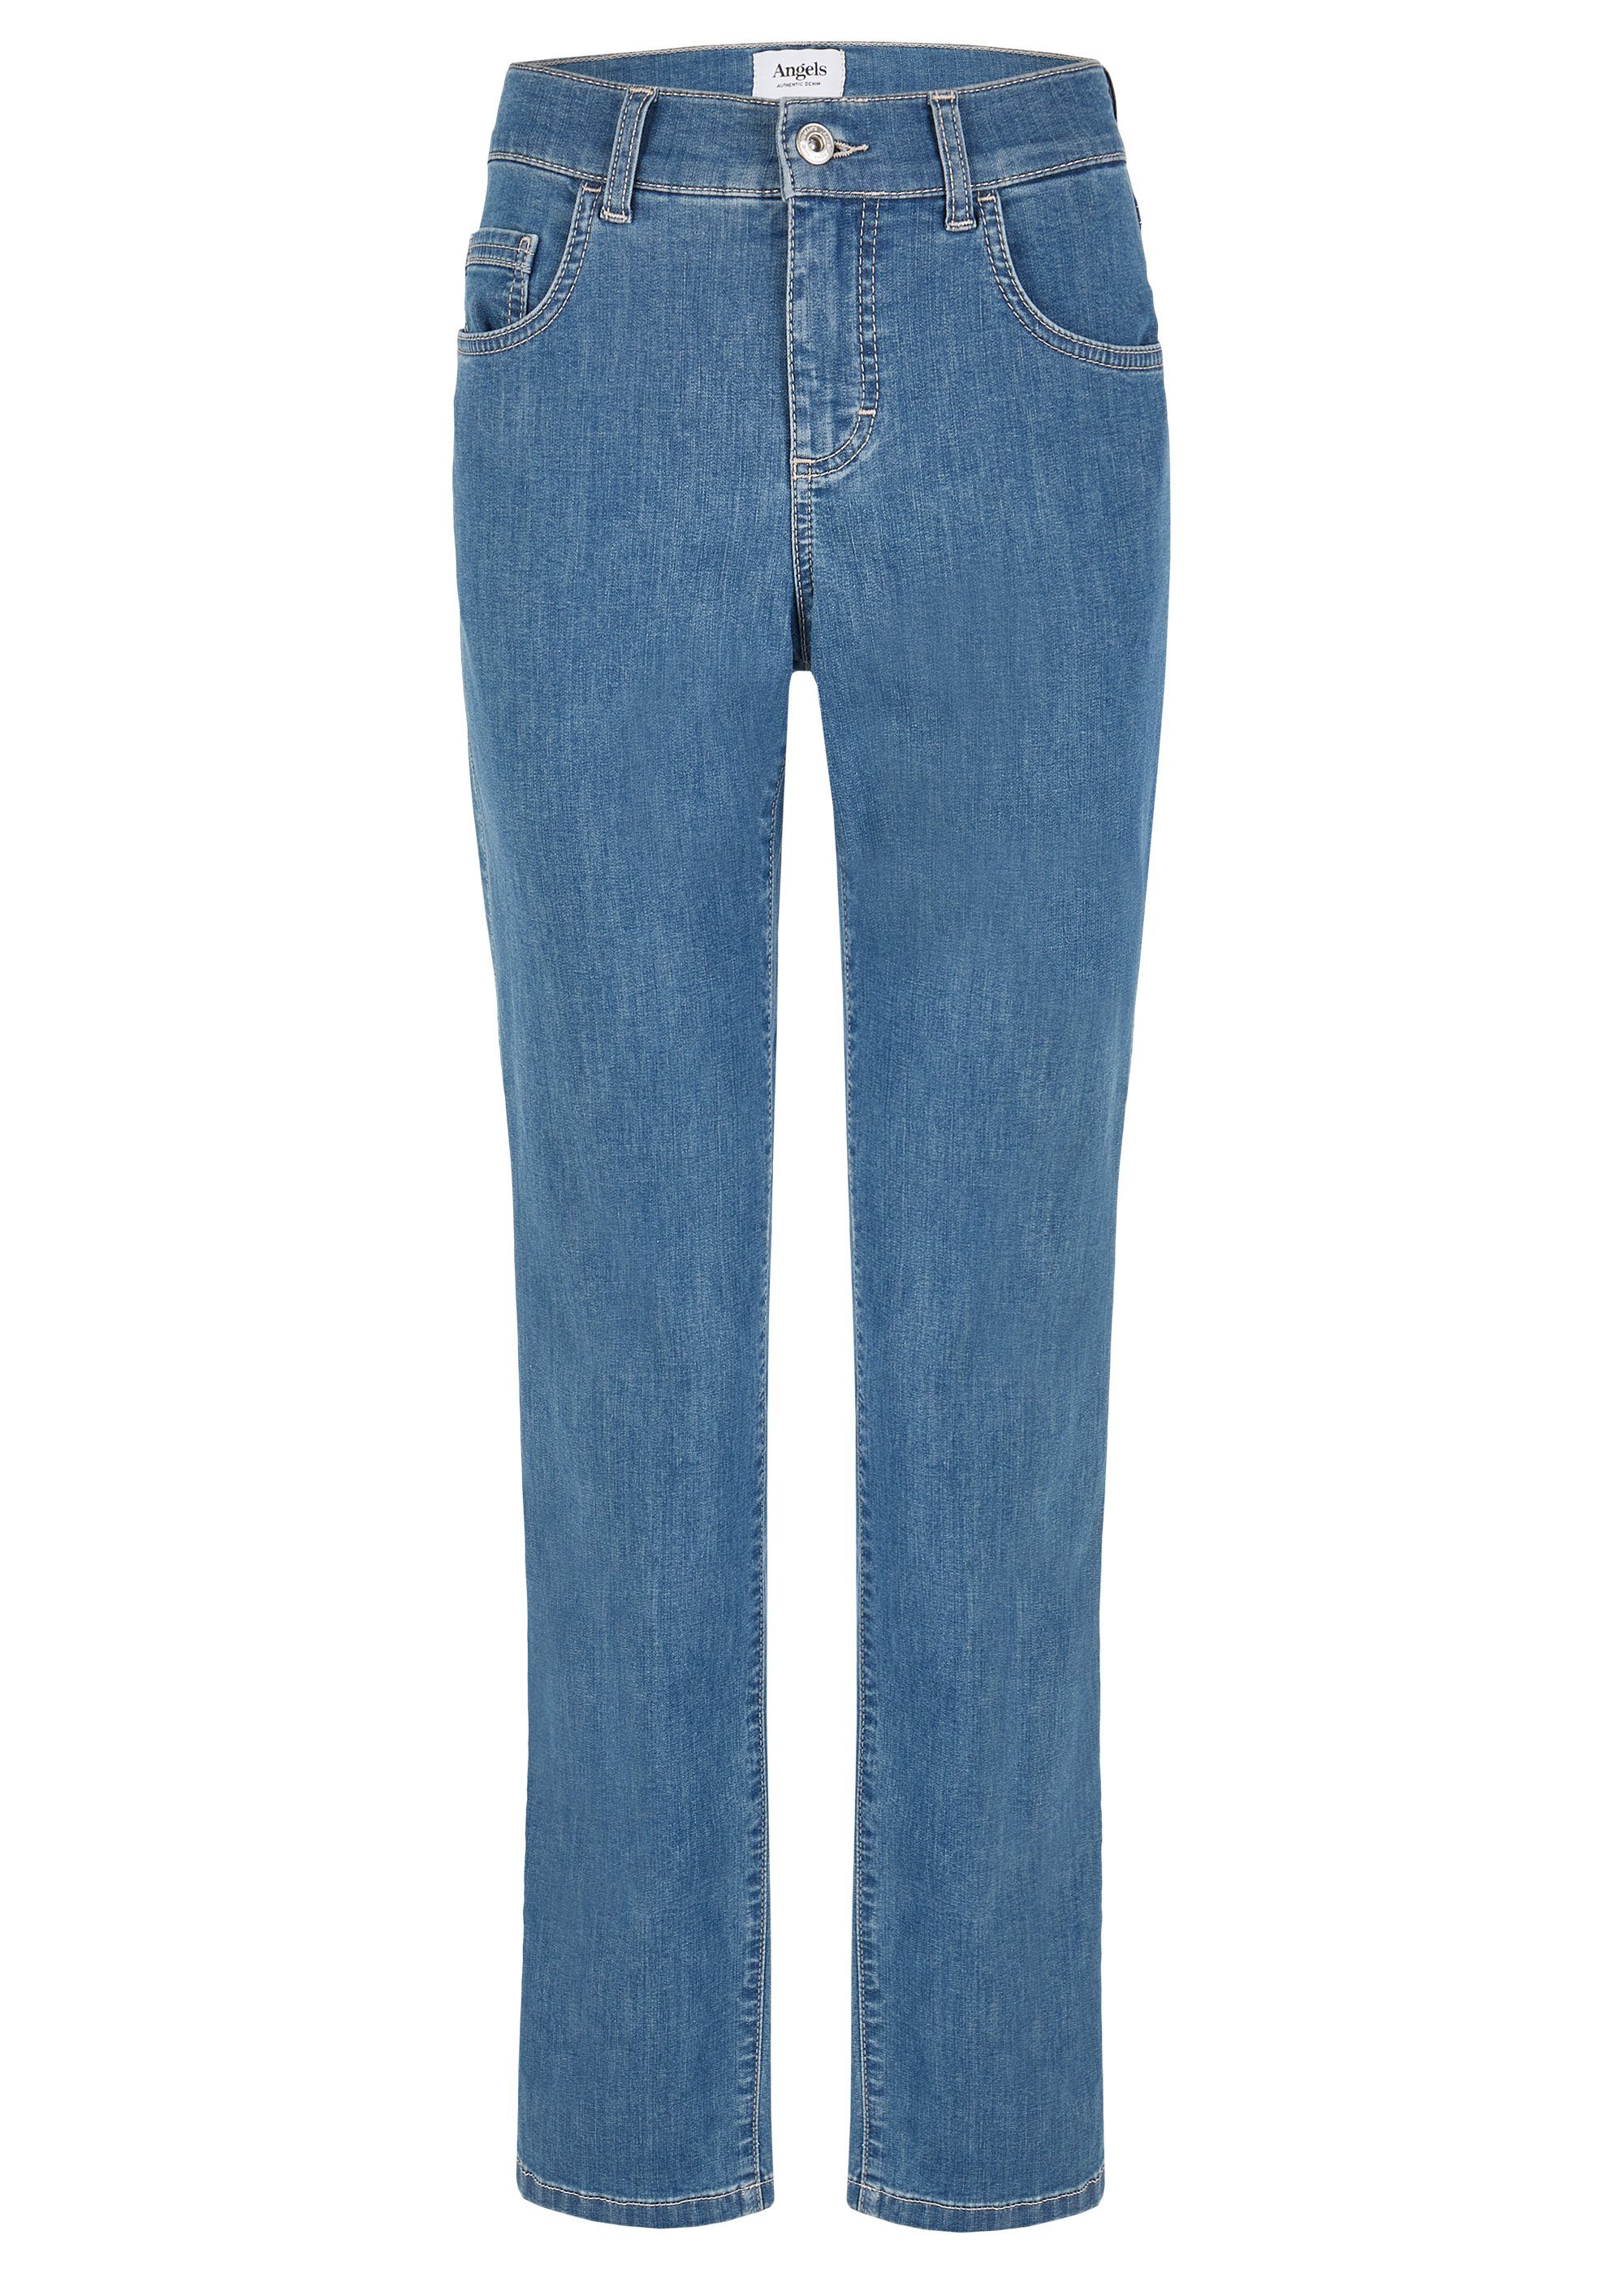 ANGELS Stretch-Jeans ANGELS JEANS DOLLY light blue 332 8000.34